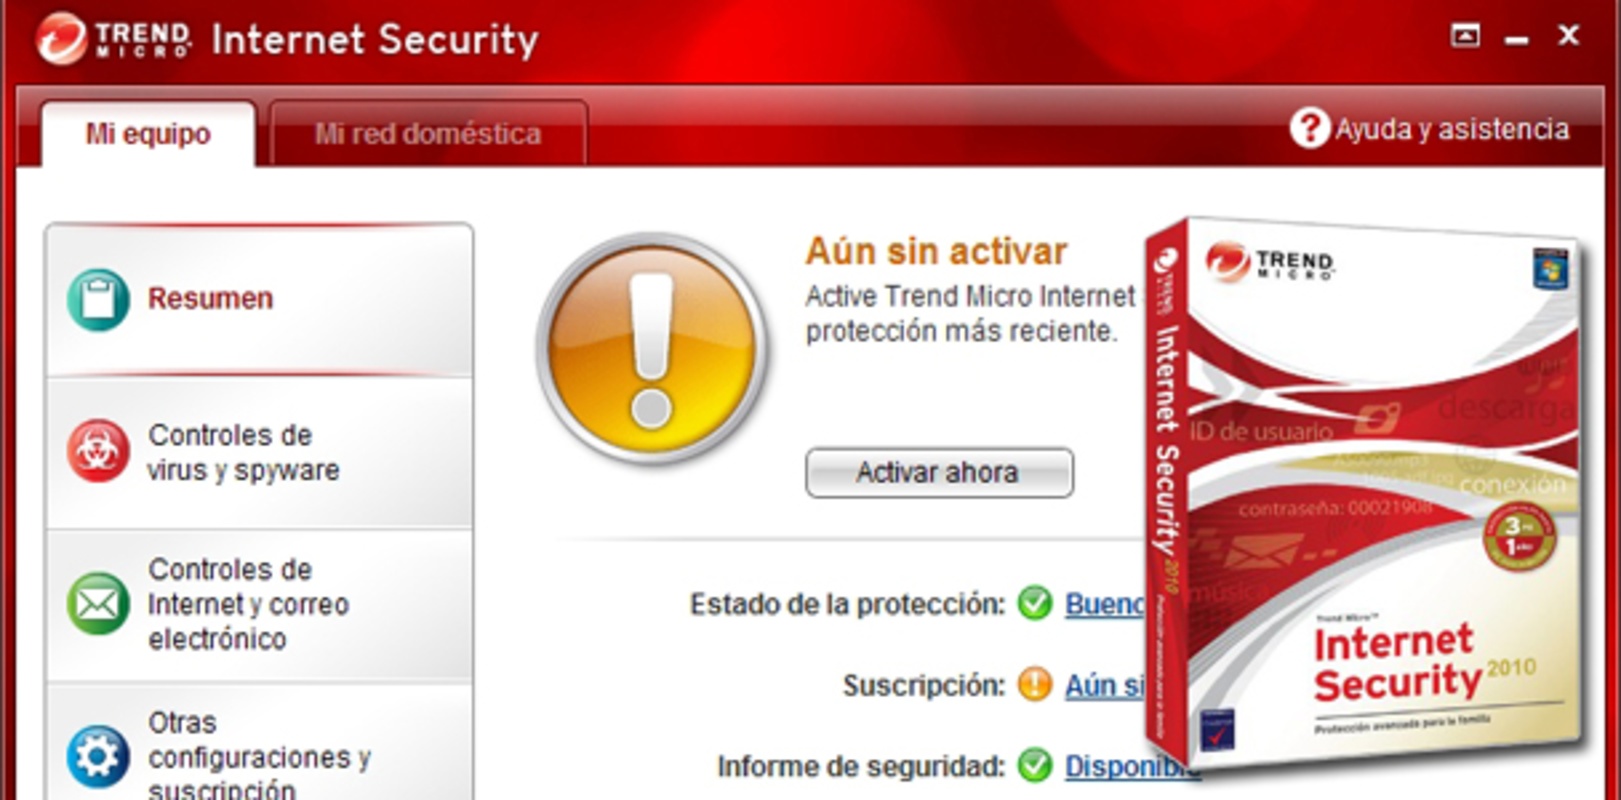 Trend Micro Internet Security 2010 feature